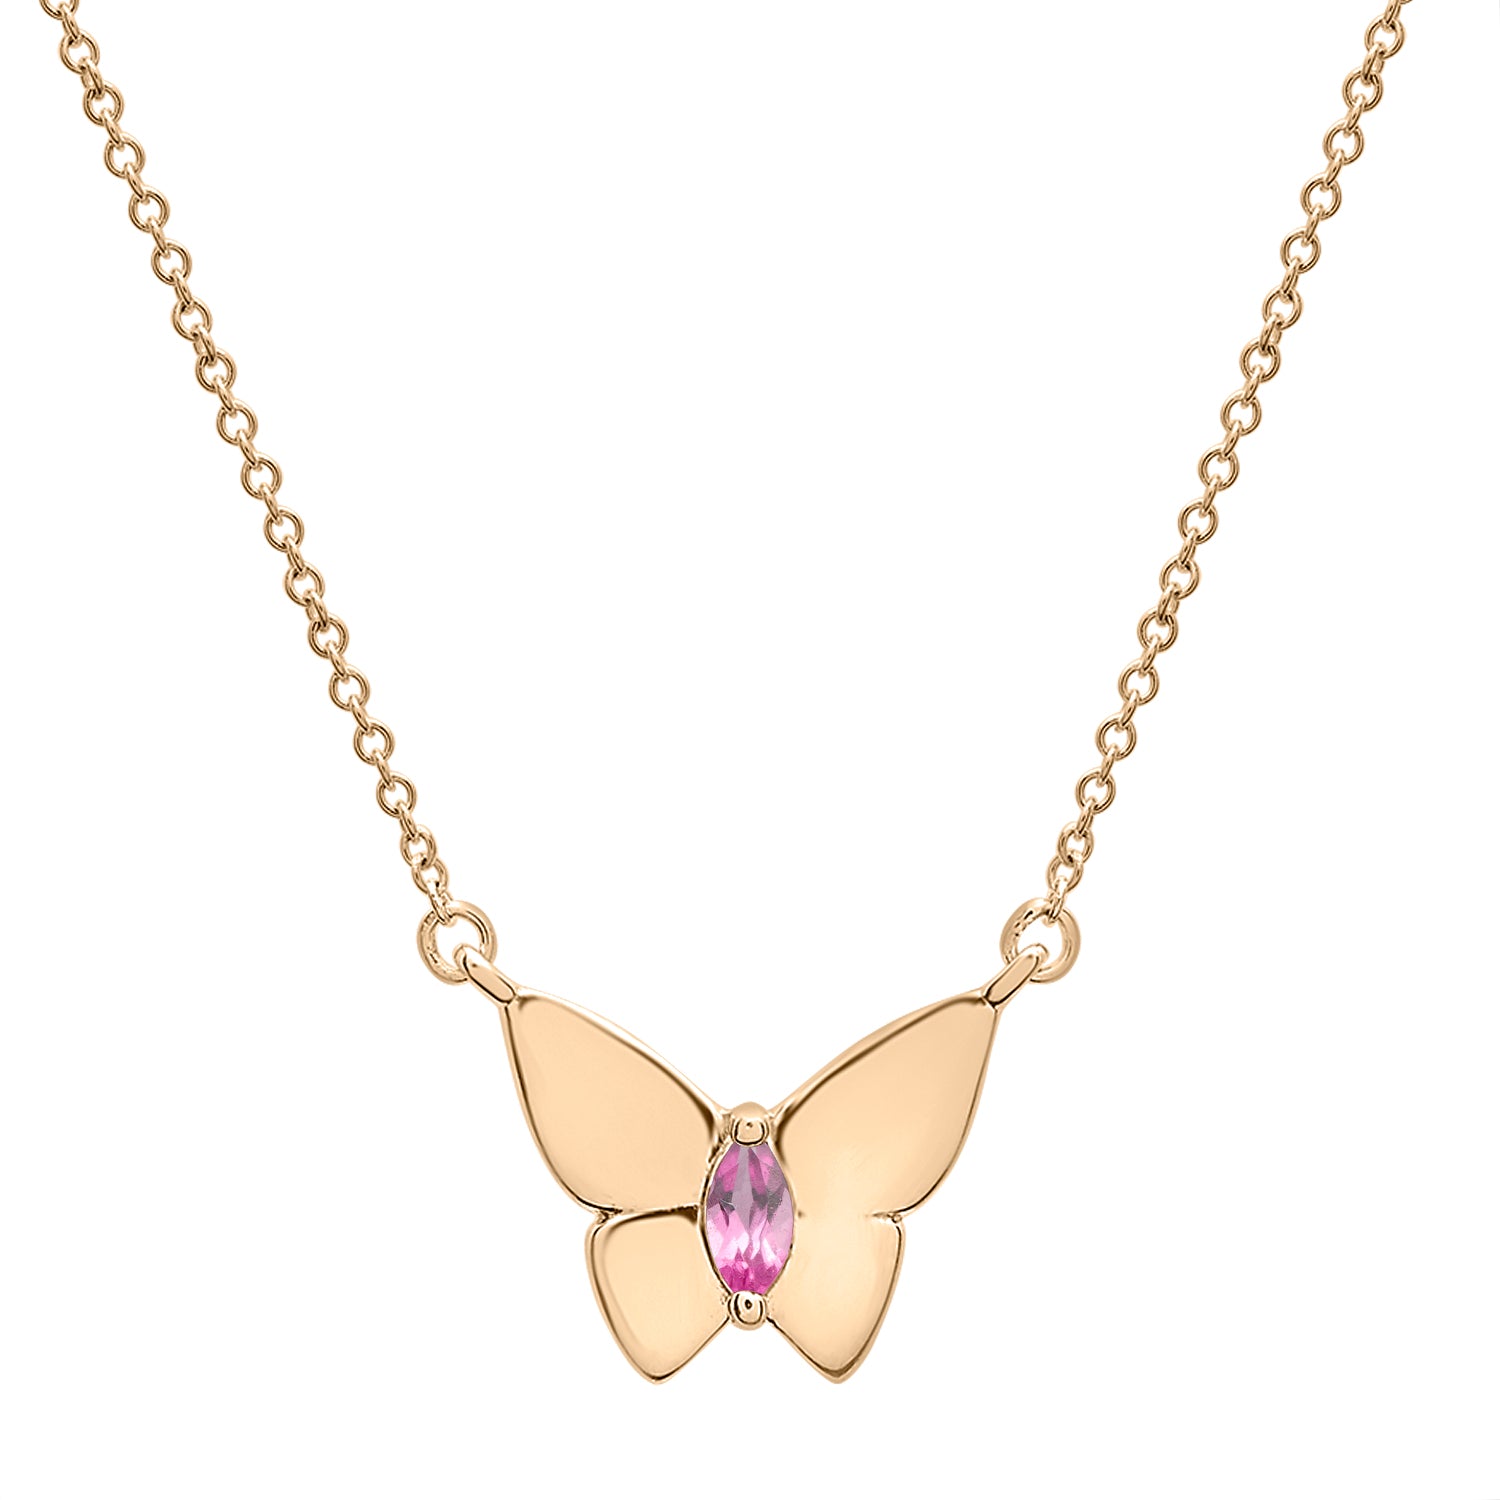 Butterfly Birthstone Necklace in Pink Stone